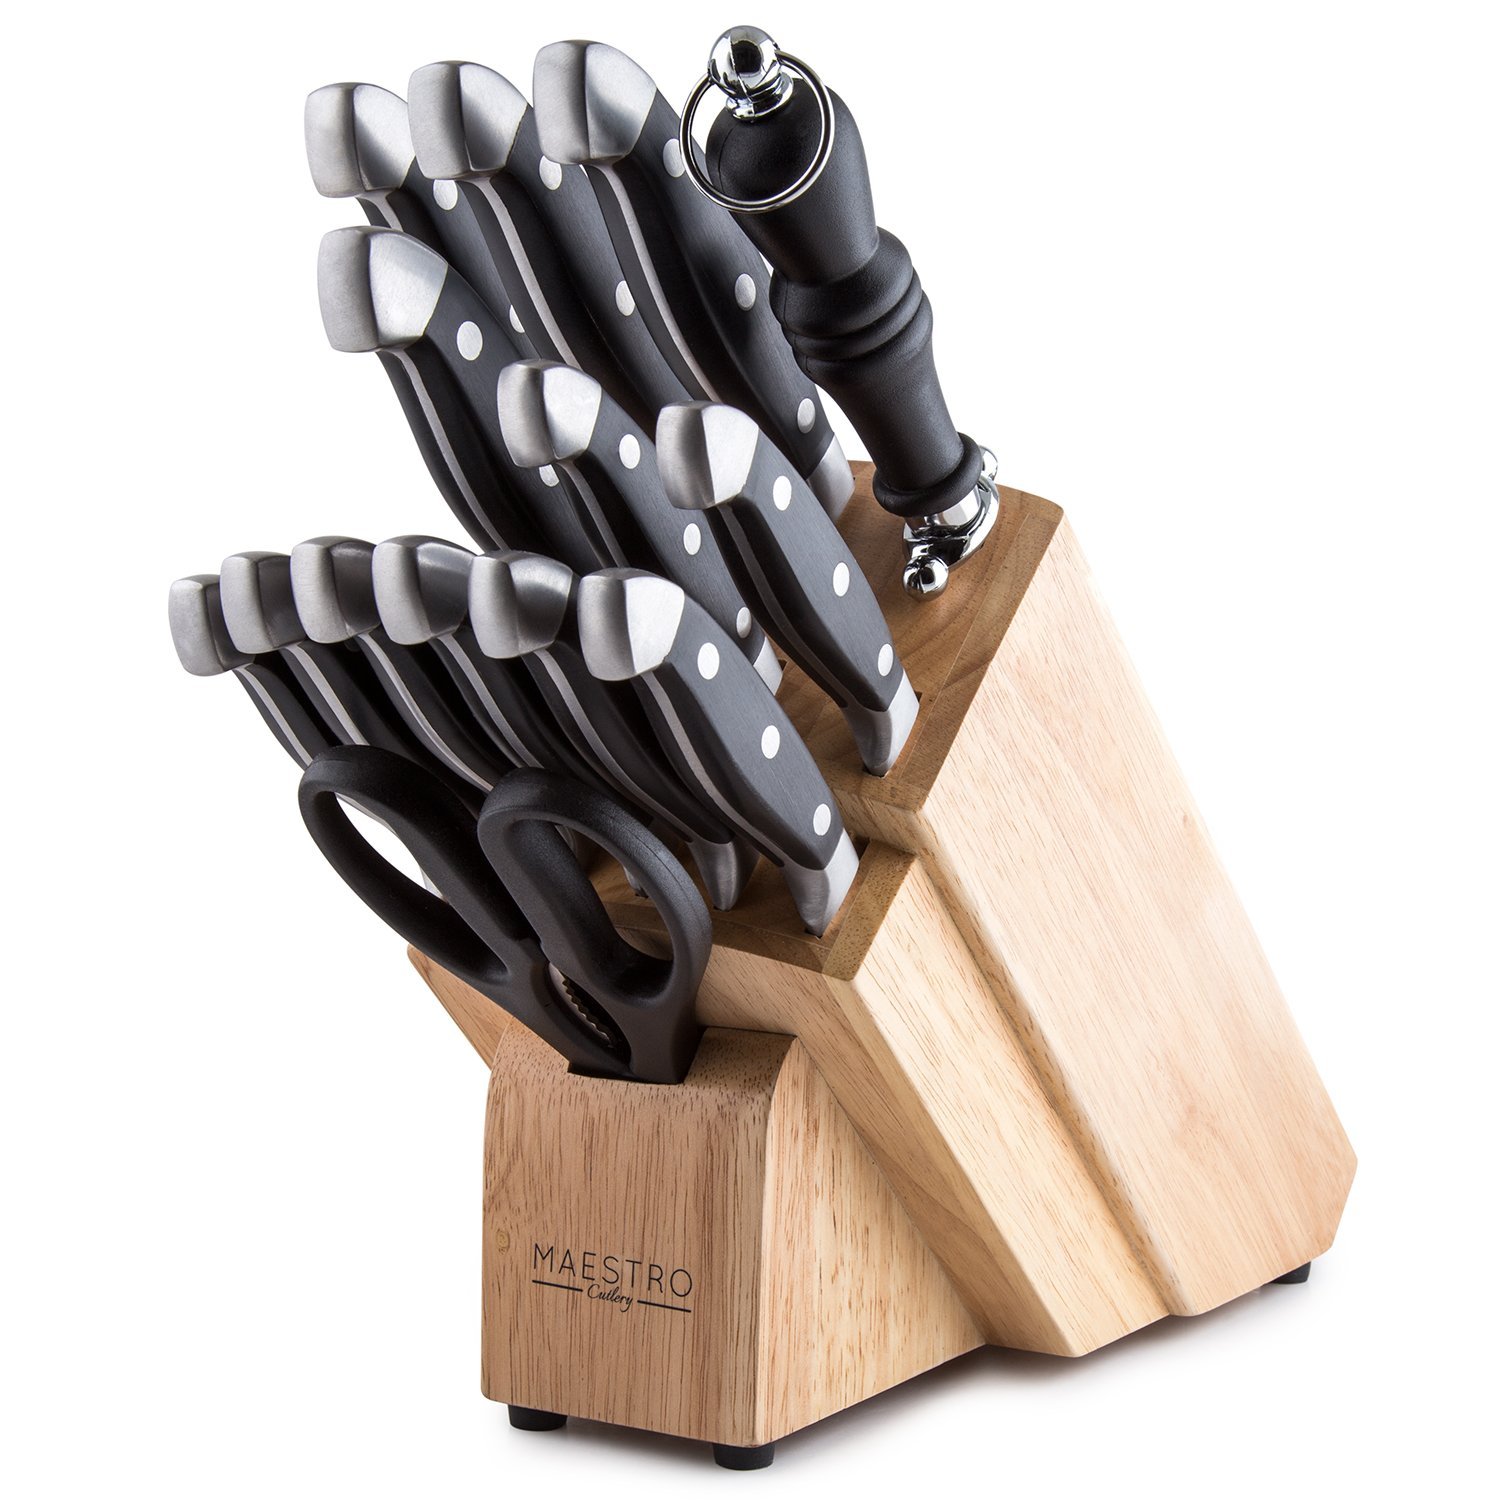 Top 10 Best Knife Set Under 100 In 2020 Reviews Economical Chef